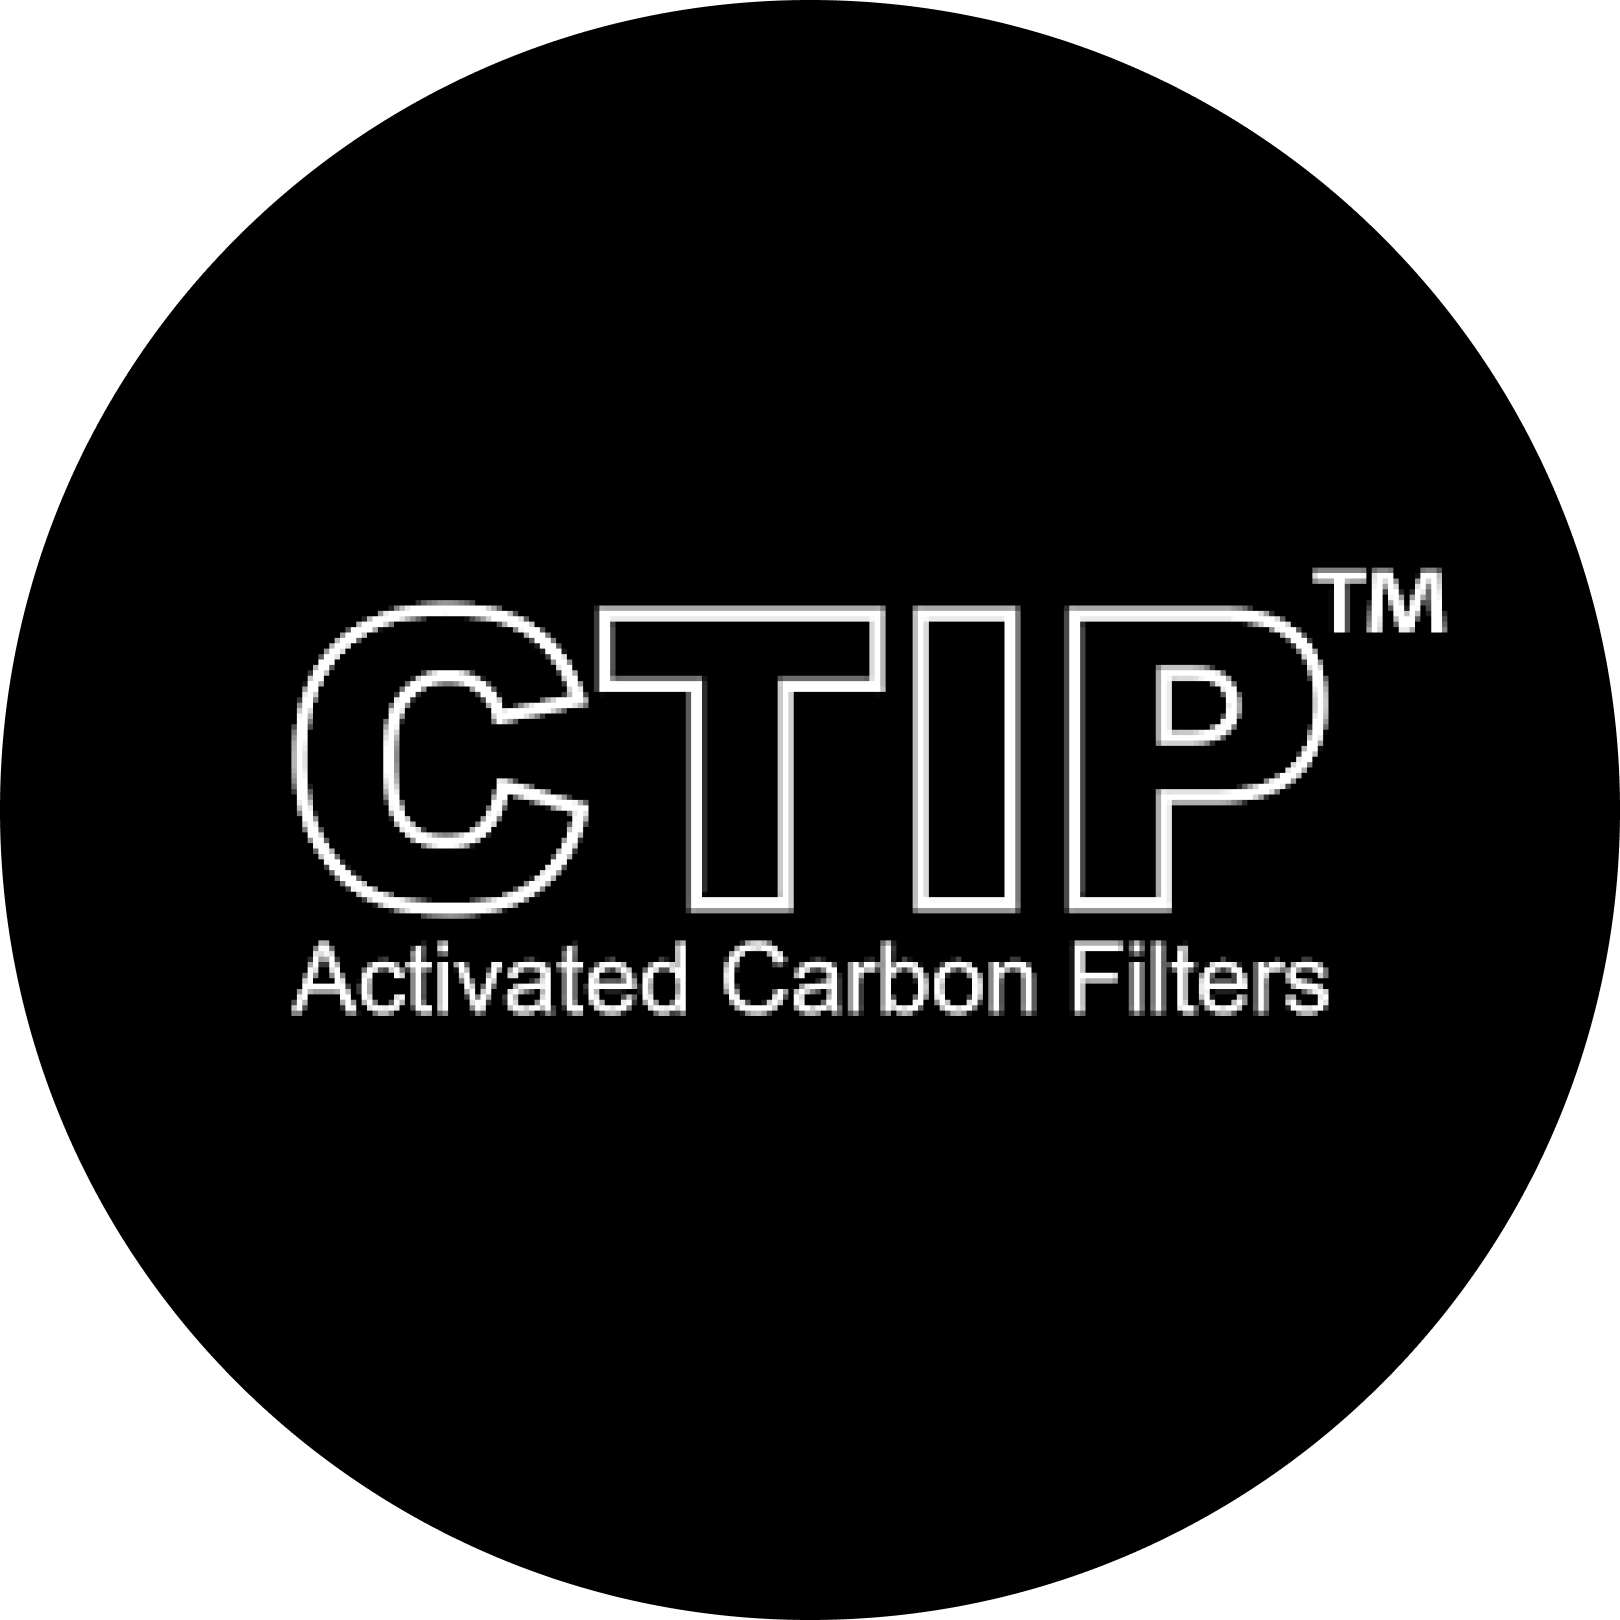 CTIP ACTIVATED CARBON FILTERS logo